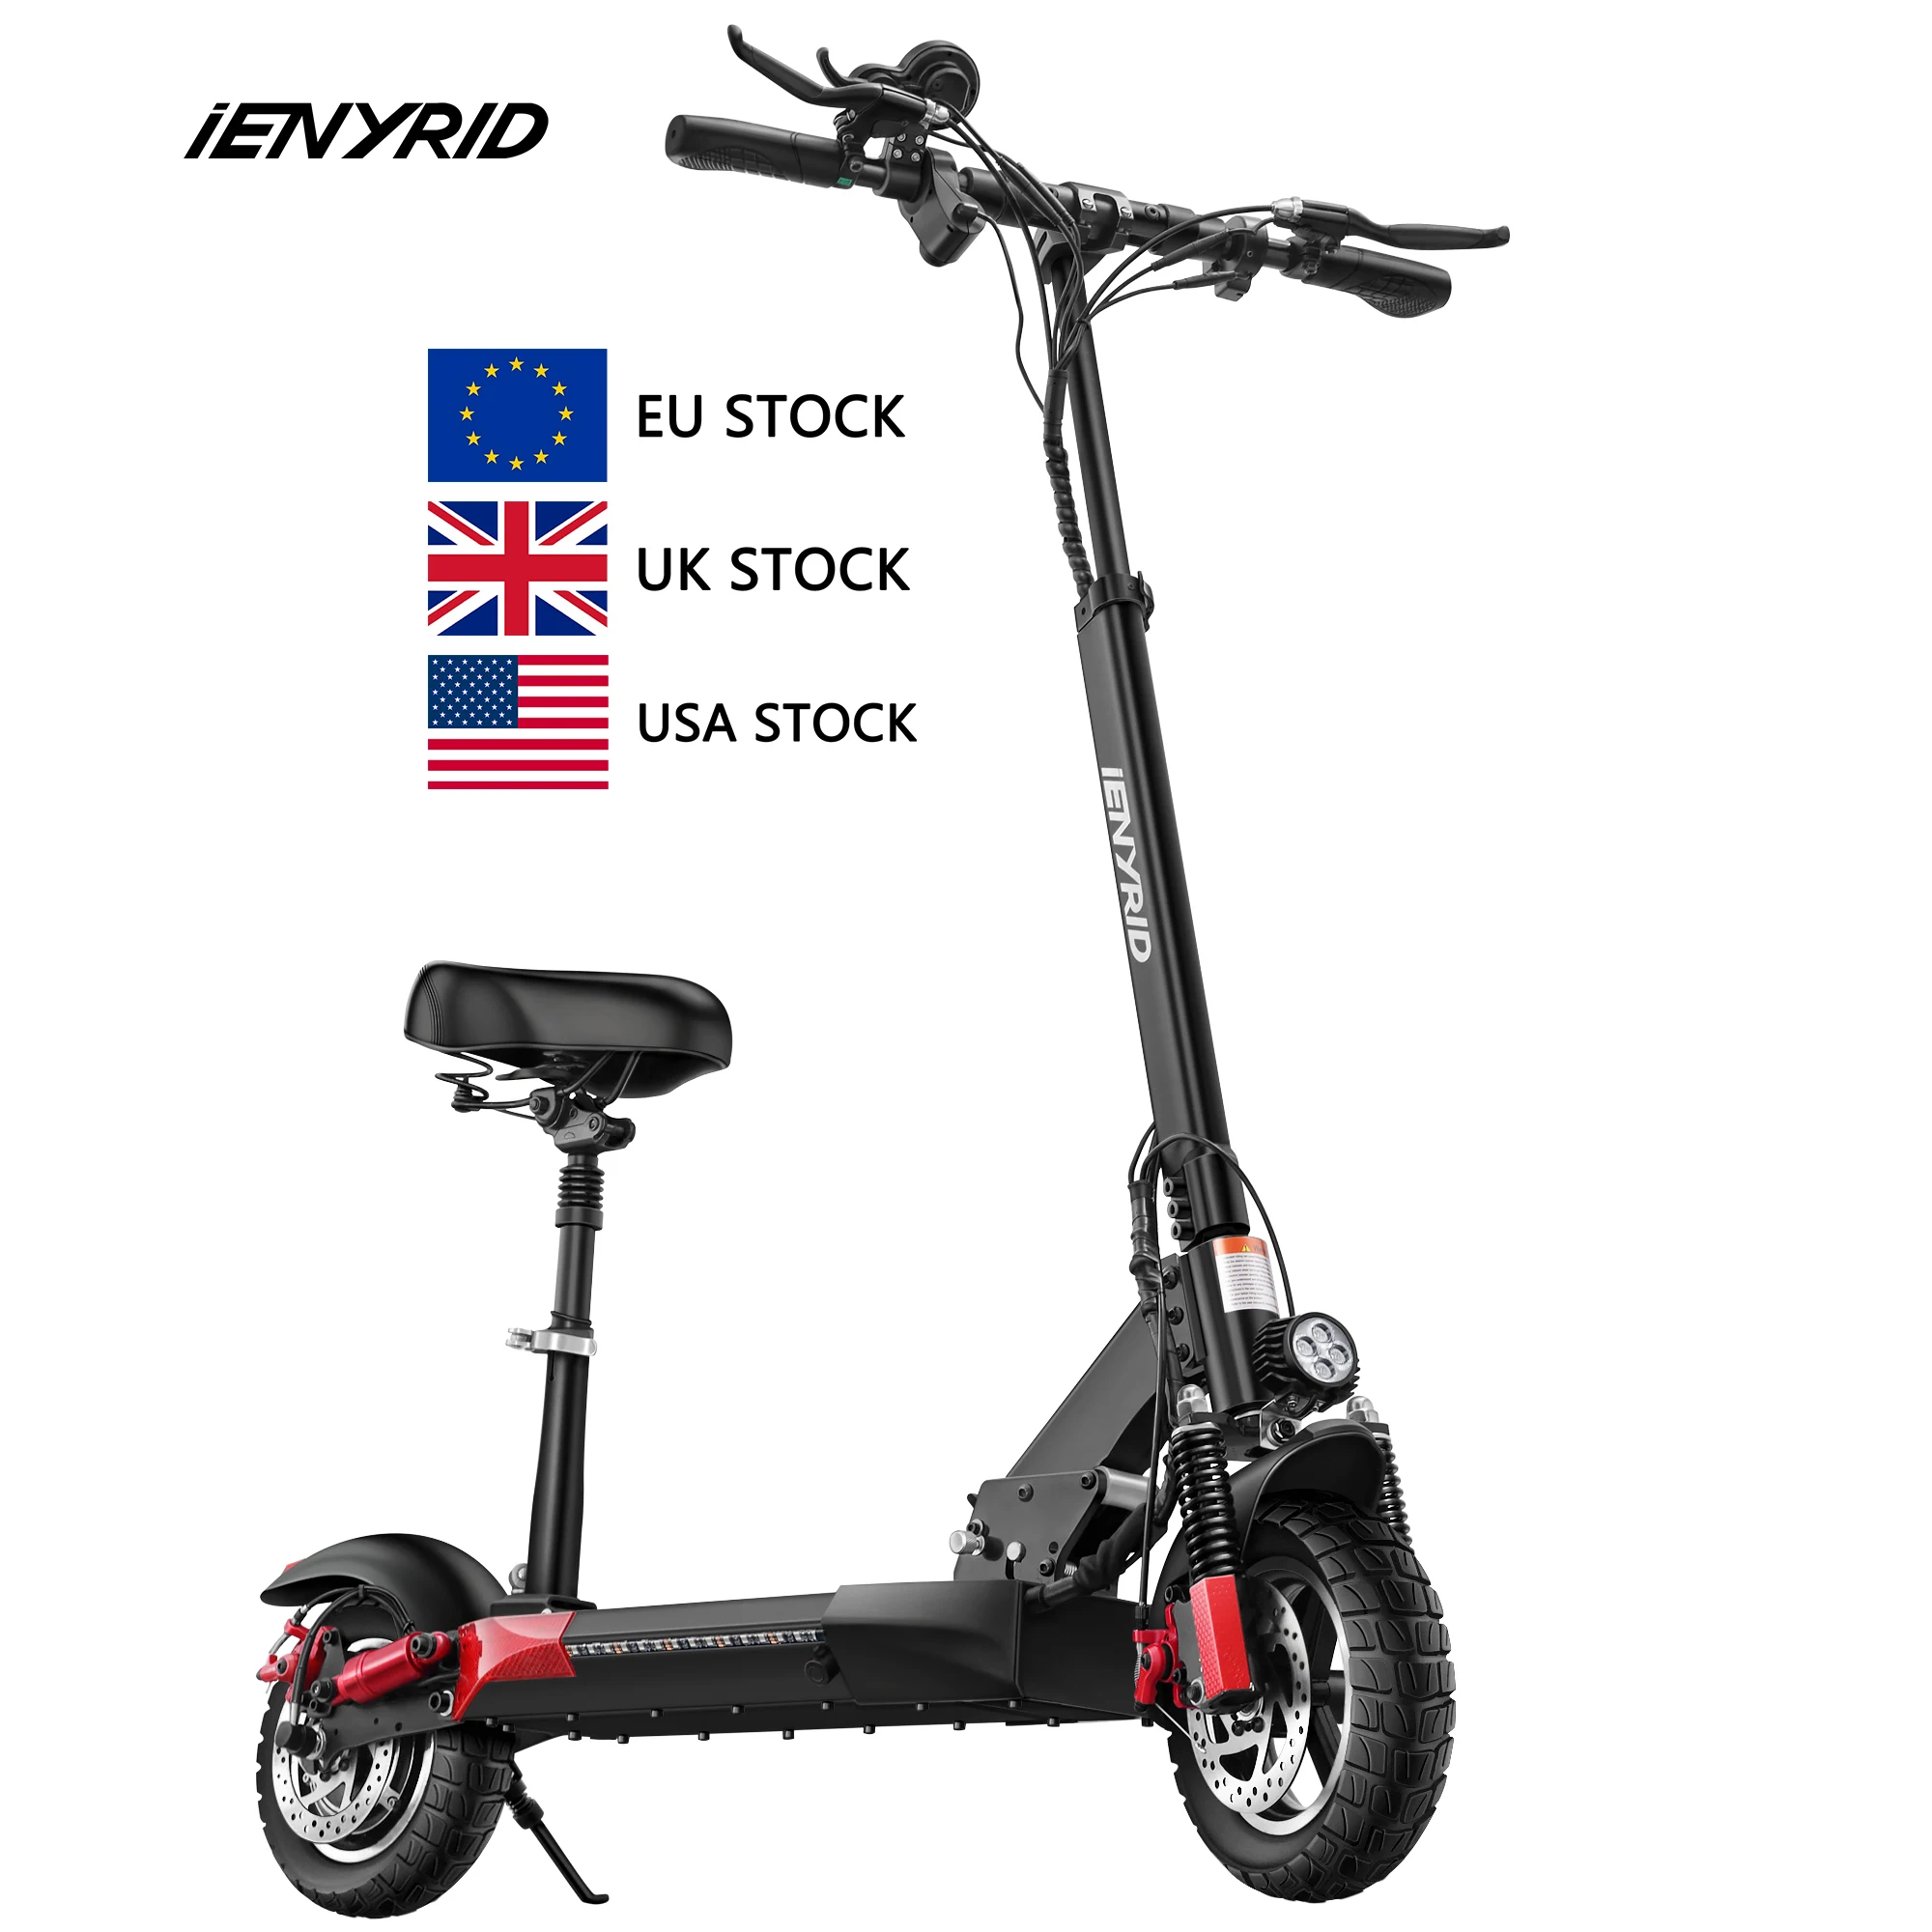 

CE RoHS iENYRID M4 PRO 16ah 10" Off-road Tires Folding Electric Scooter Waterproof 45KM/H Max Speed EU warehouse